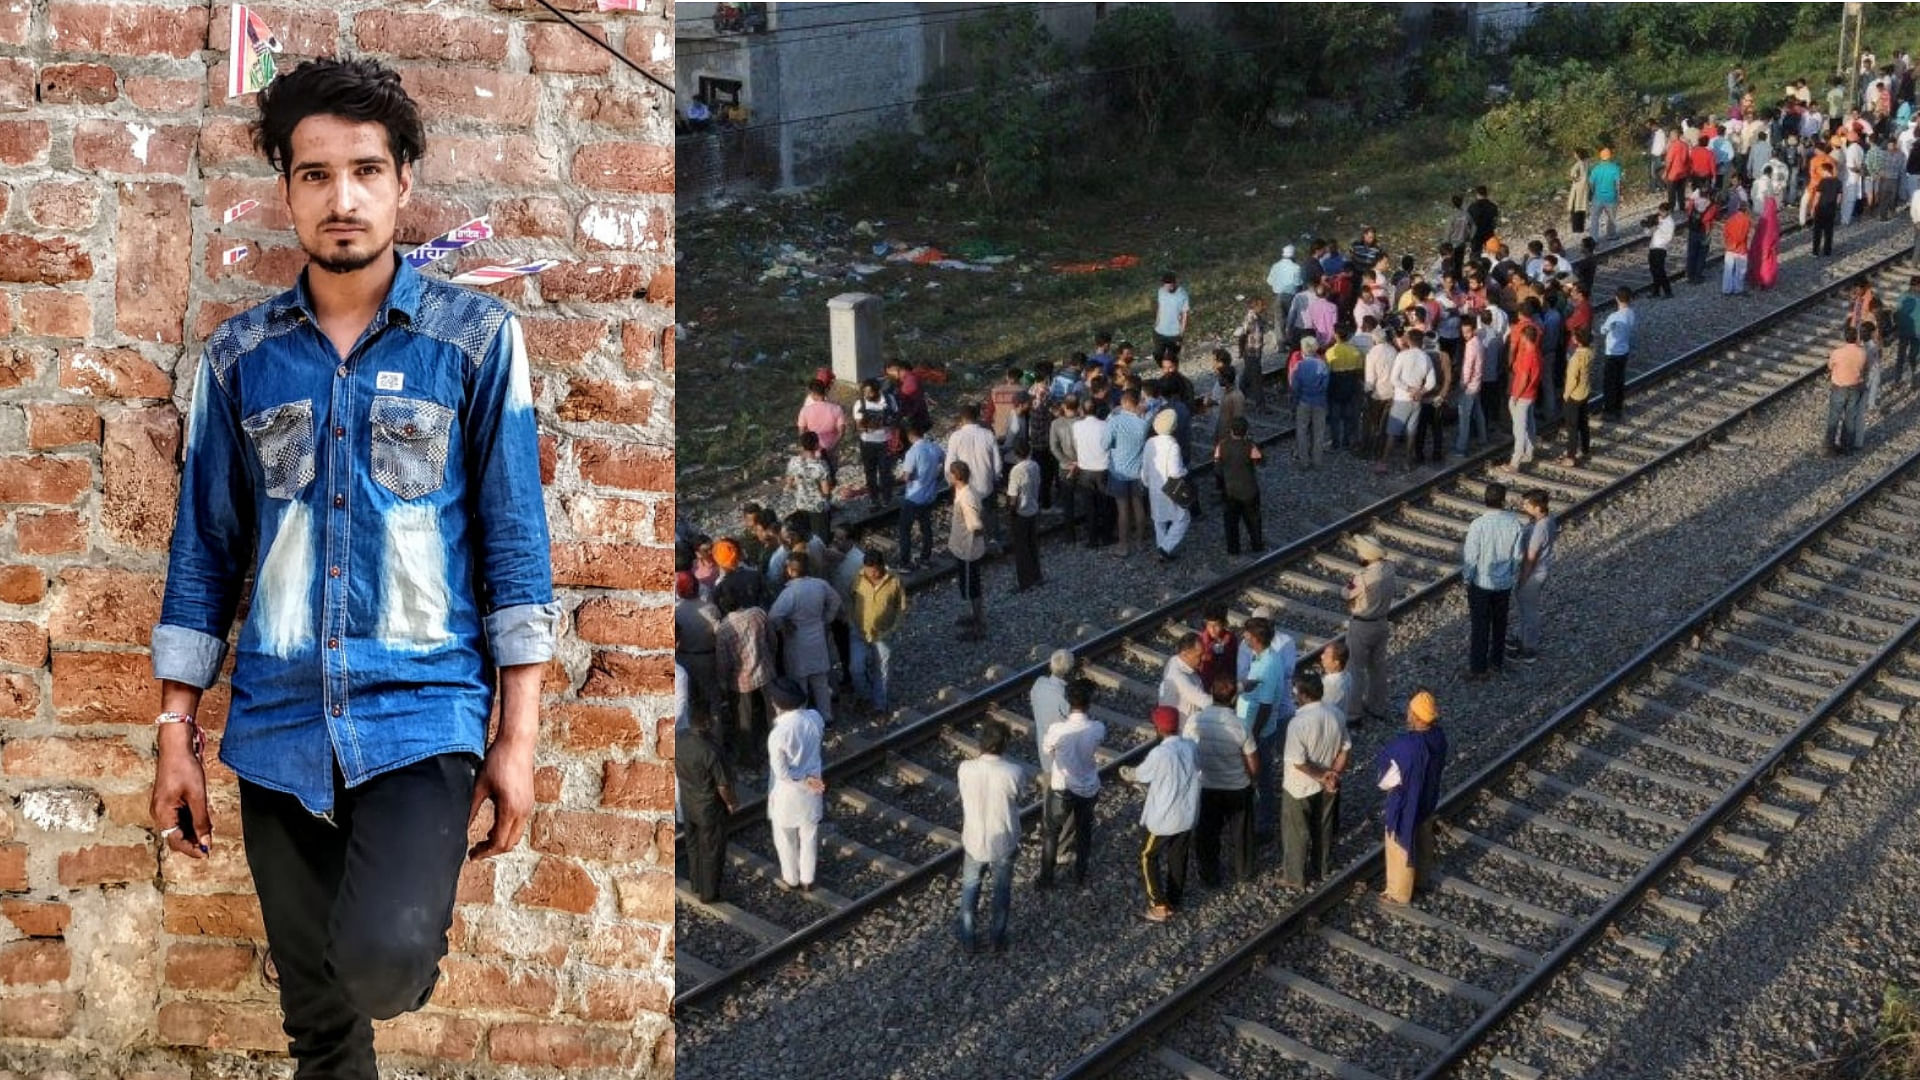 On the left is Saurabh who likes to drink rum or whiskey around the three adjacent railway tracks where the horrific Amritsar train accident occurred.